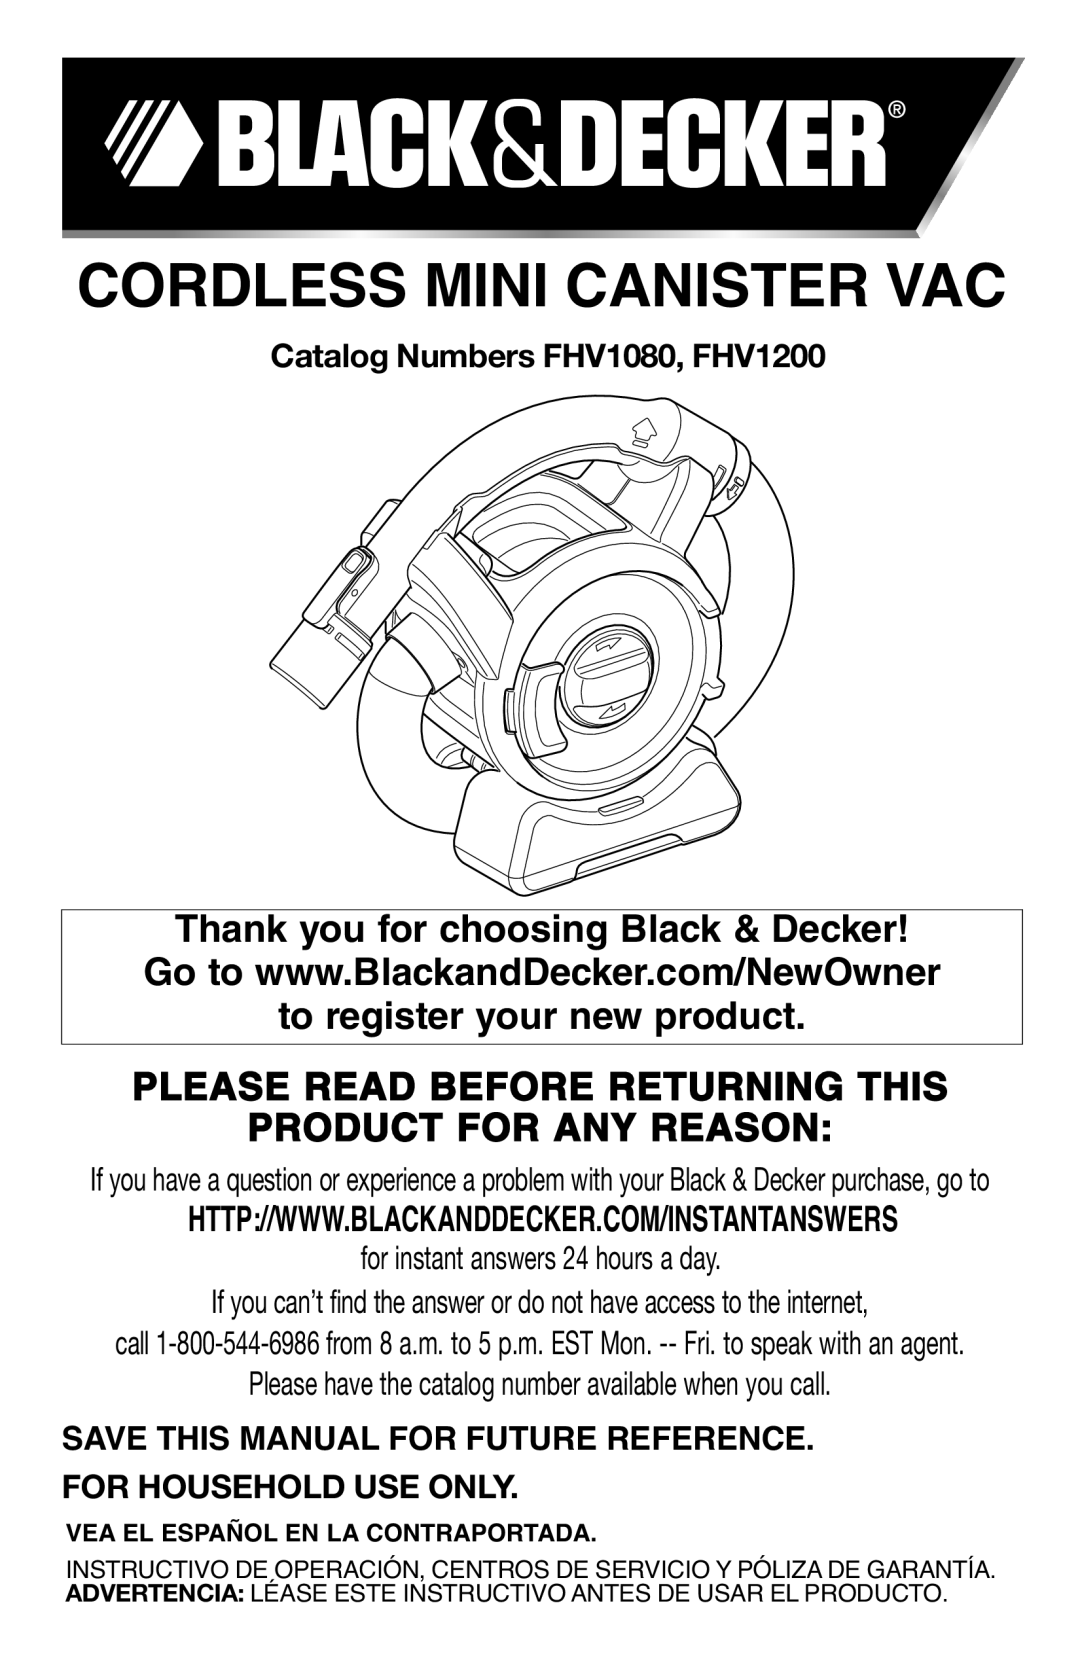 Black & Decker 90564858 manual Cordless Mini Canister Vac, Catalog Numbers FHV1080, FHV1200, For Household Use Only 